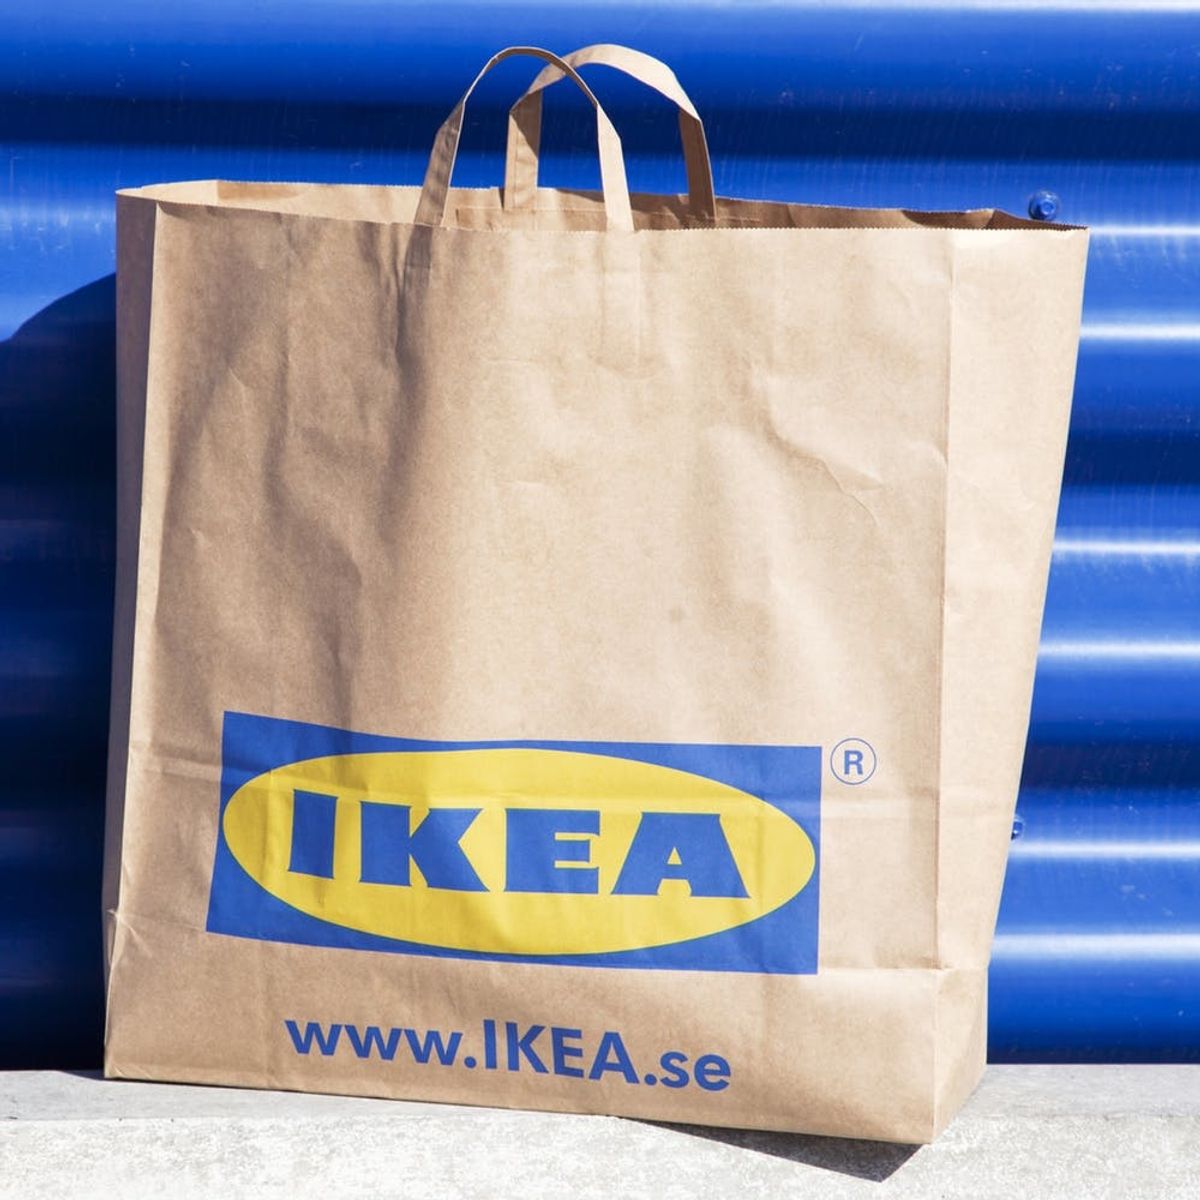 One of IKEA’s Most Recognizable Items Is Getting a Whole New Look